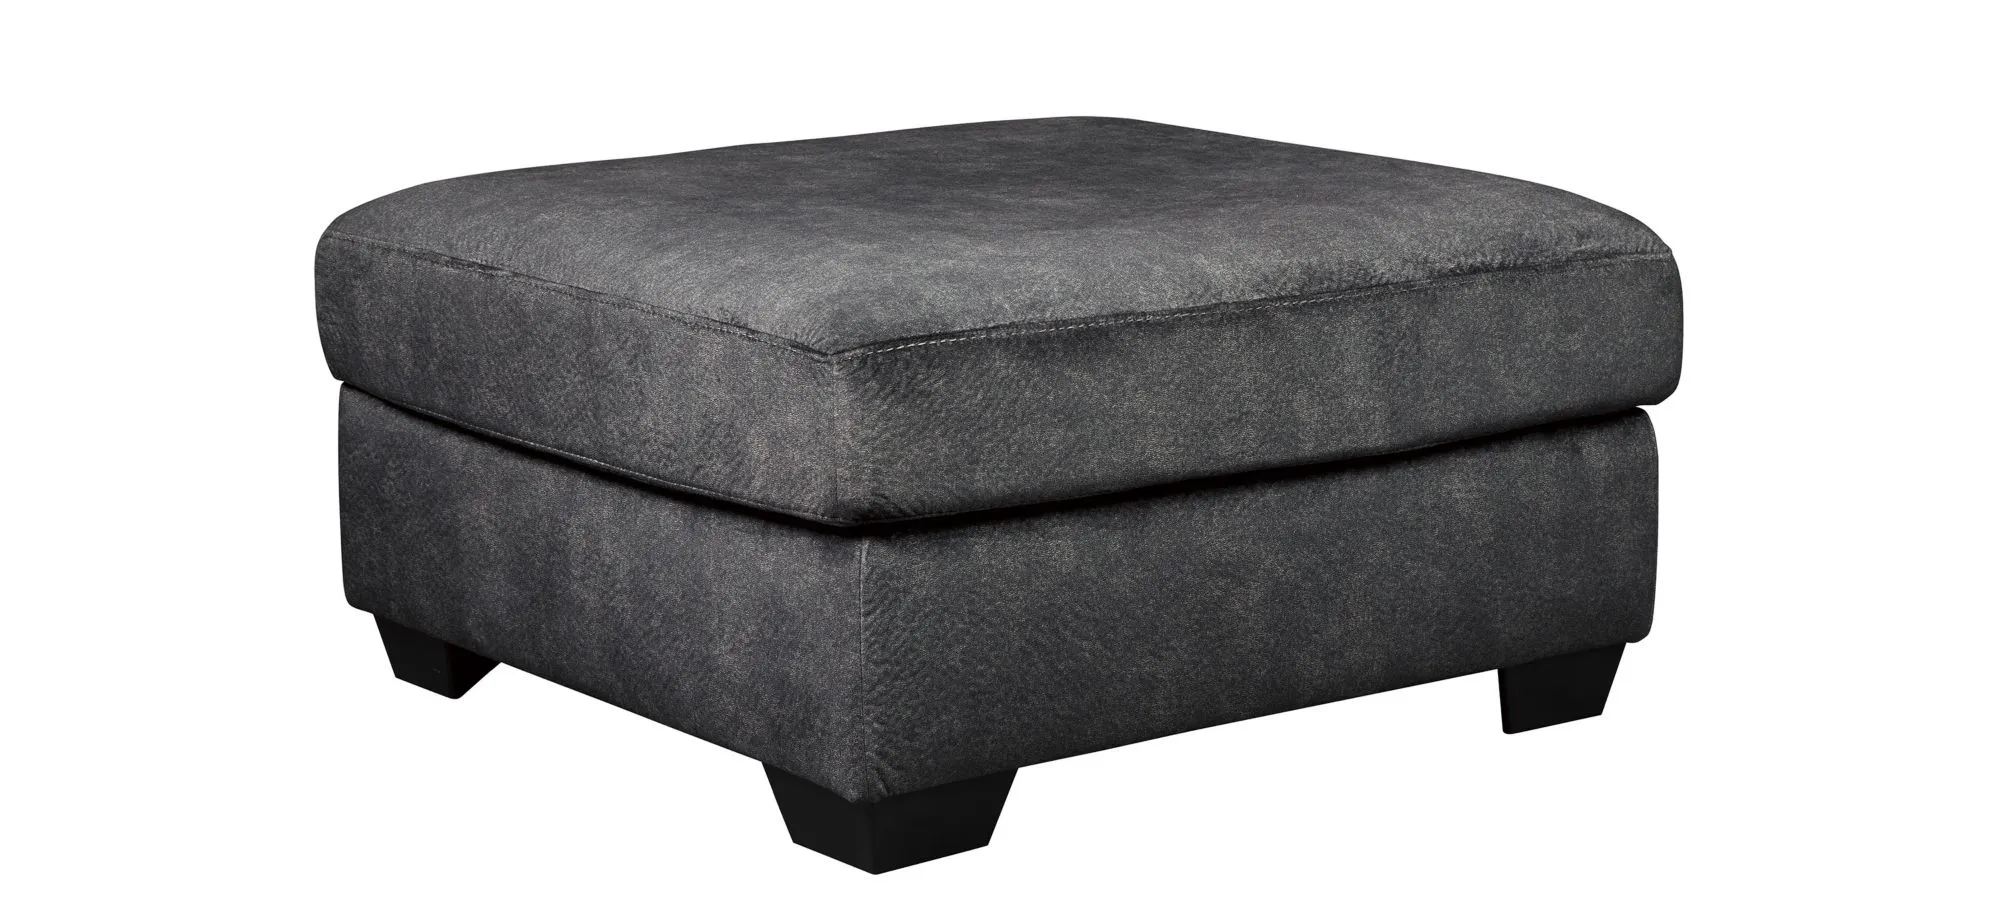 Dalesley Oversized Ottoman in Granite by Ashley Furniture